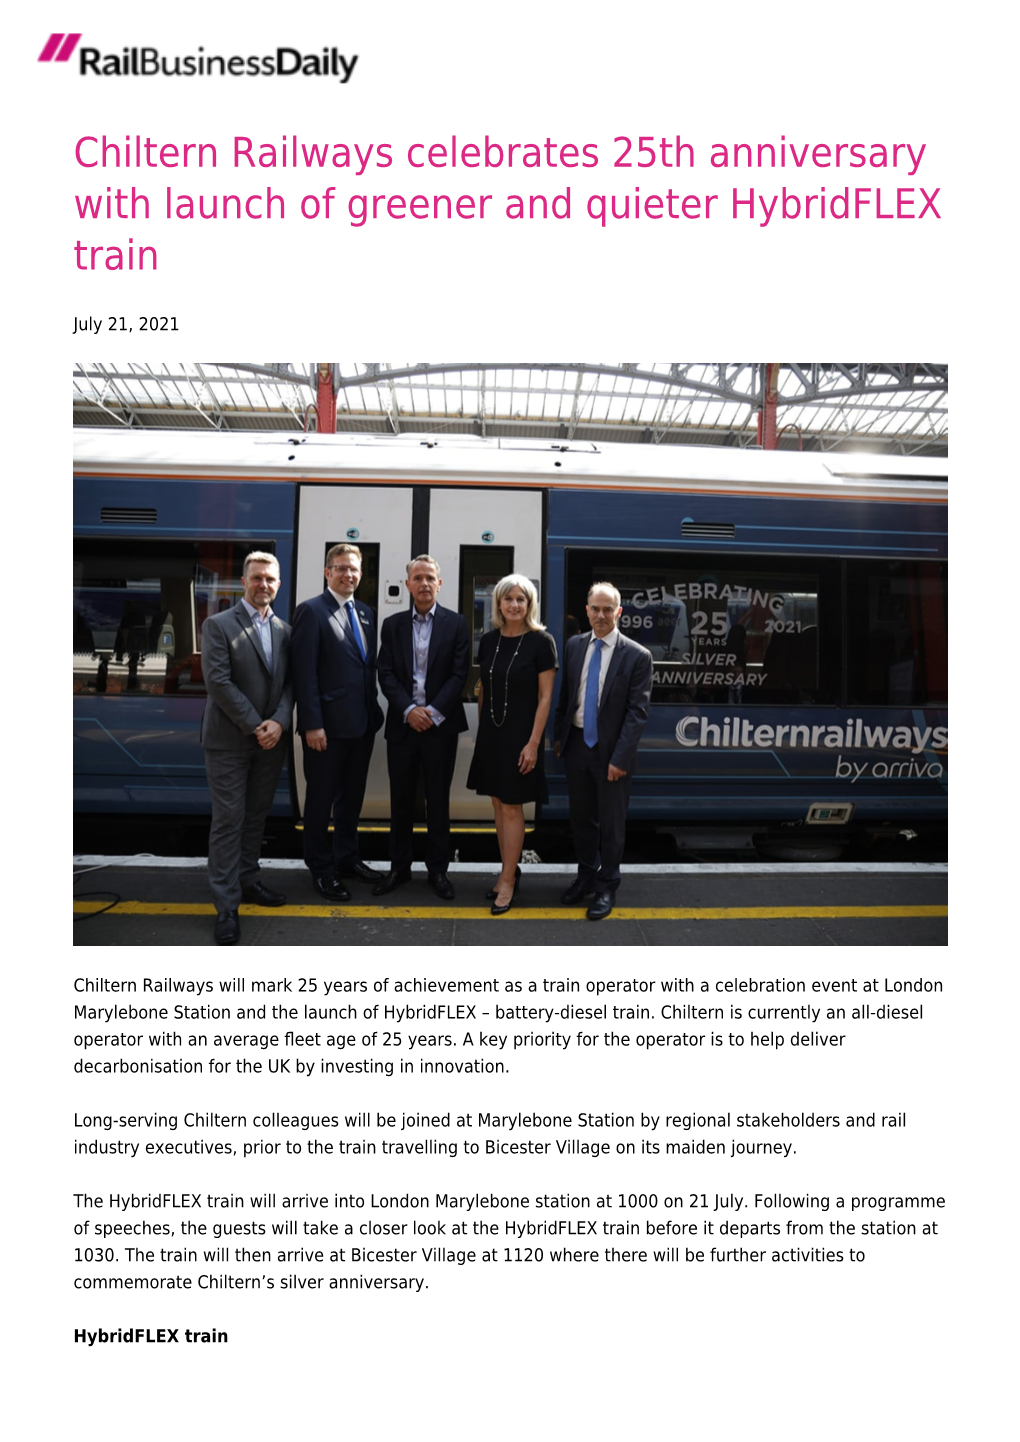 Chiltern Railways Celebrates 25Th Anniversary with Launch of Greener and Quieter Hybridflex Train